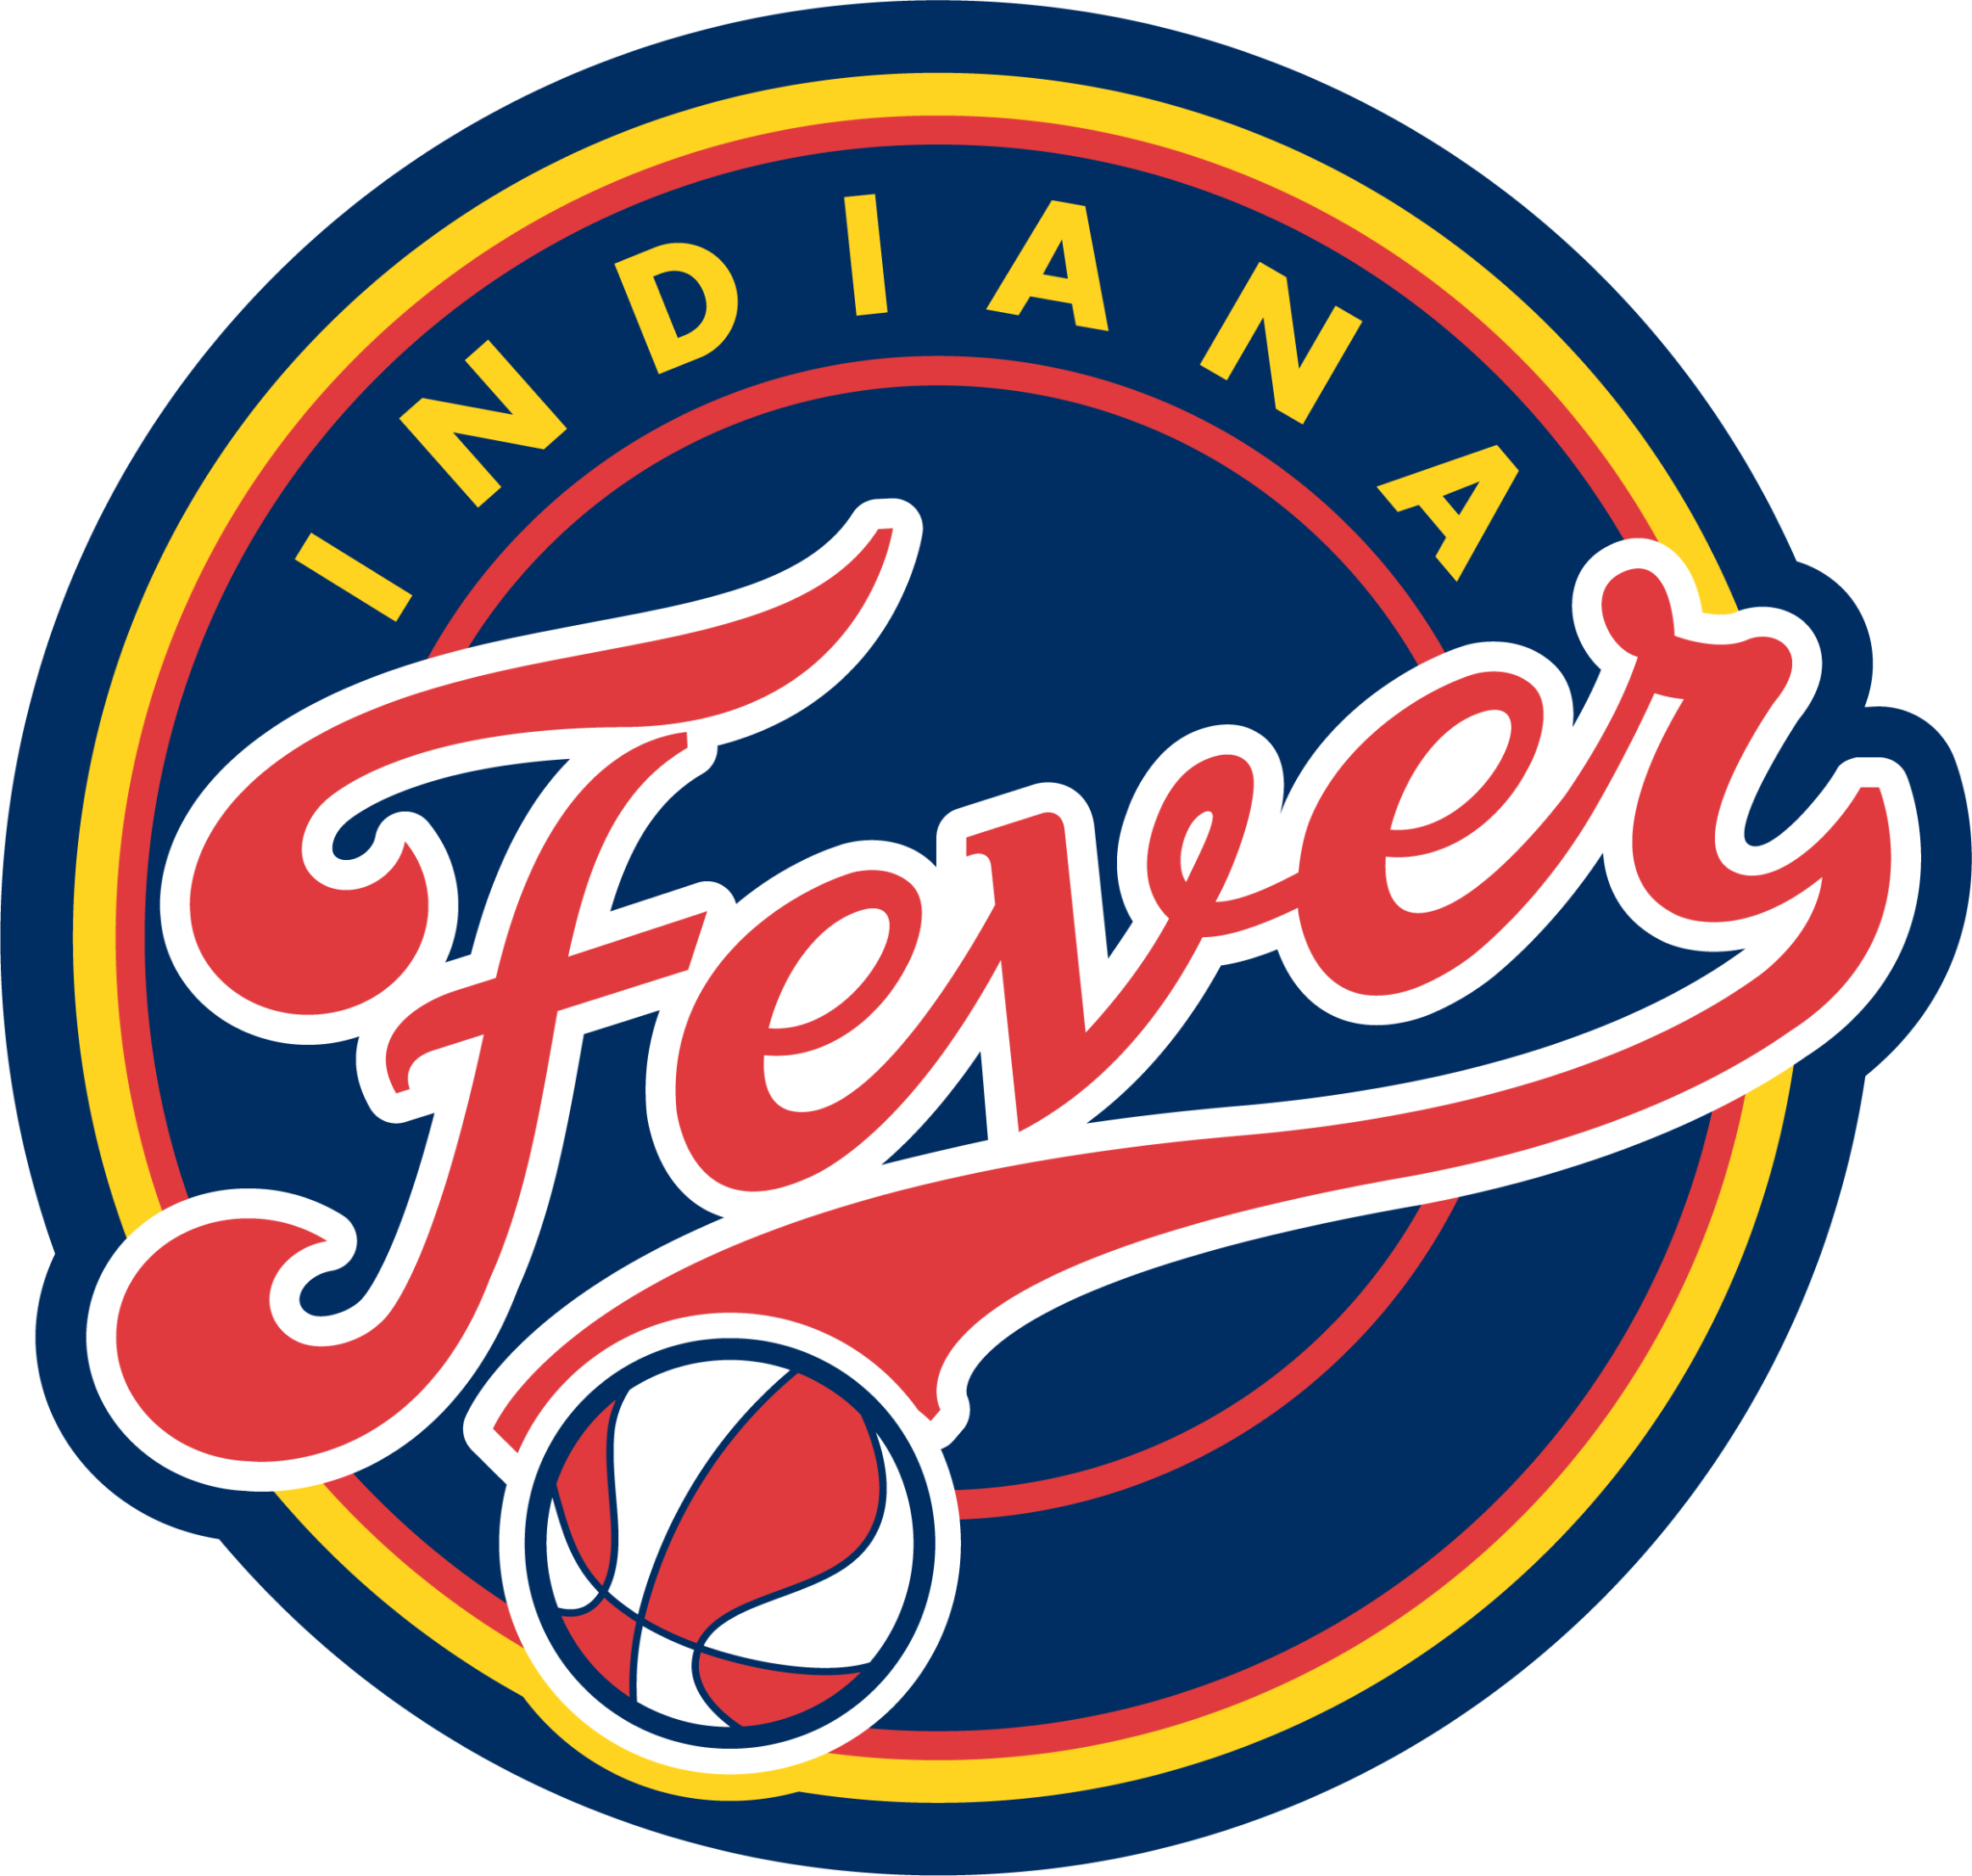 Indiana Fever reaffirm plan to stream team’s games for free during 2020